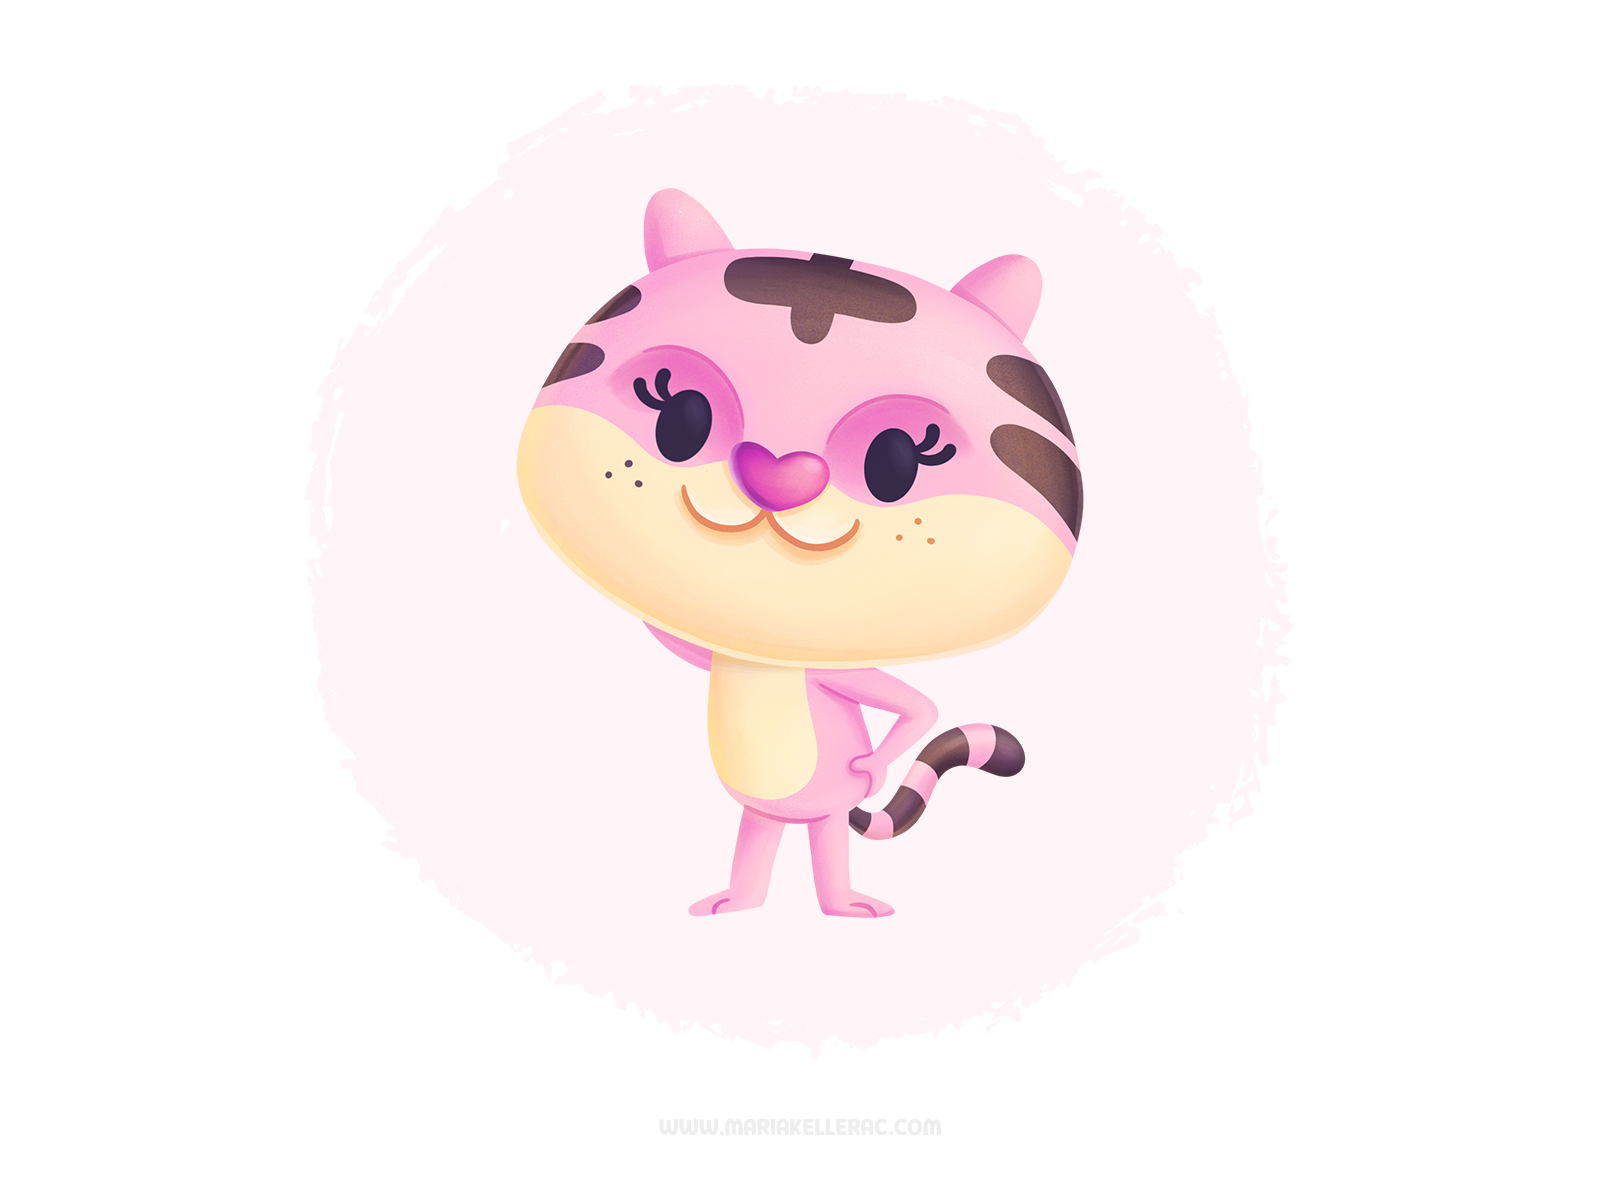 Pink Tiger by Maria Keller on Dribbble